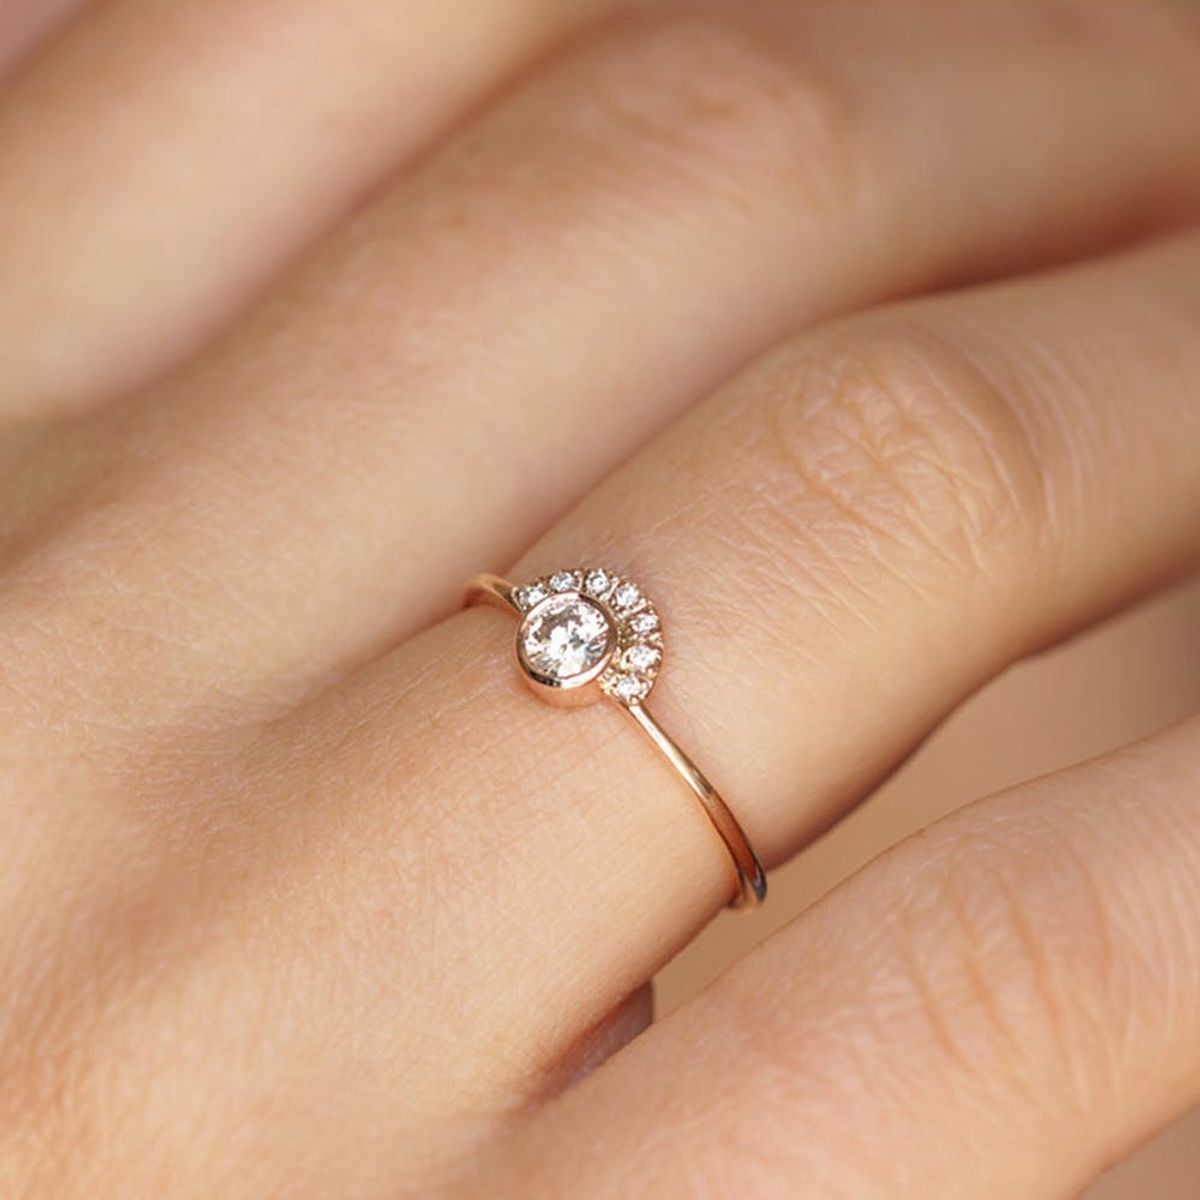 This Jewelry Brand Lets You Test Out Your Wedding Ring